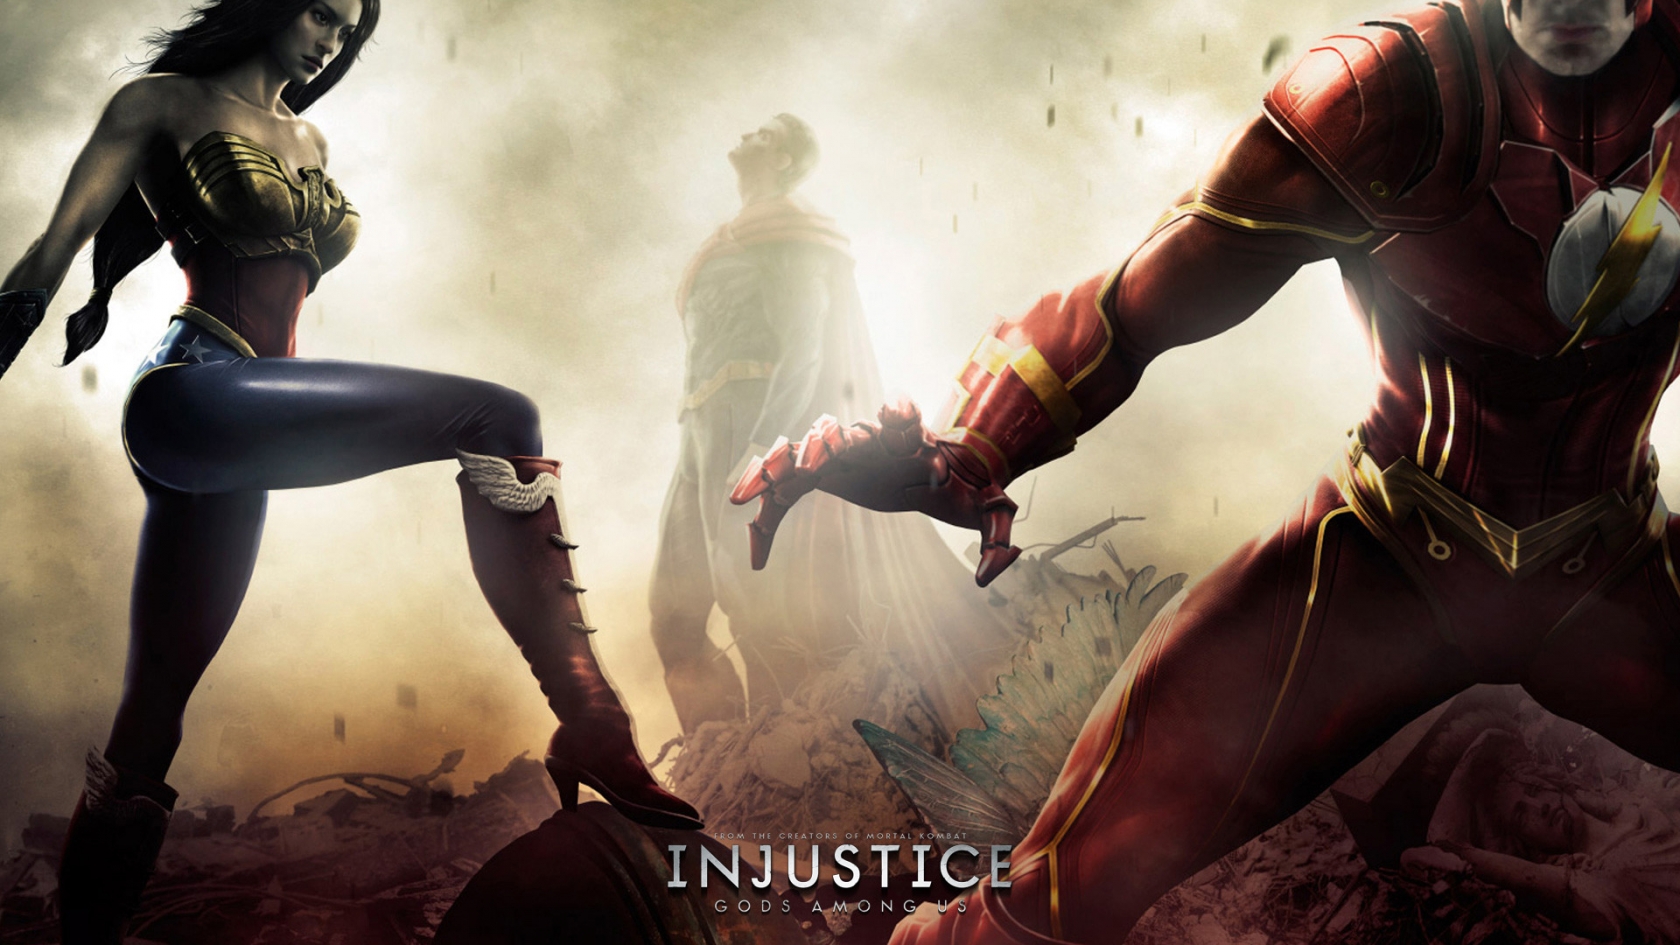 Injustice Gods Among Us Game for 1680 x 945 HDTV resolution